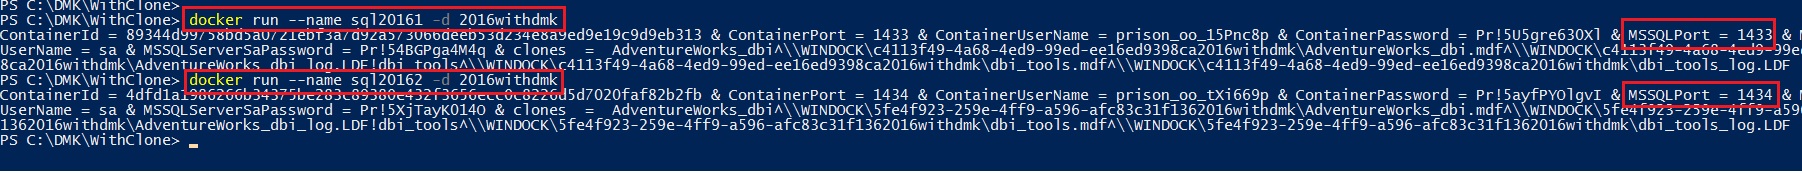 blog 133 - 7- windocks - create containers